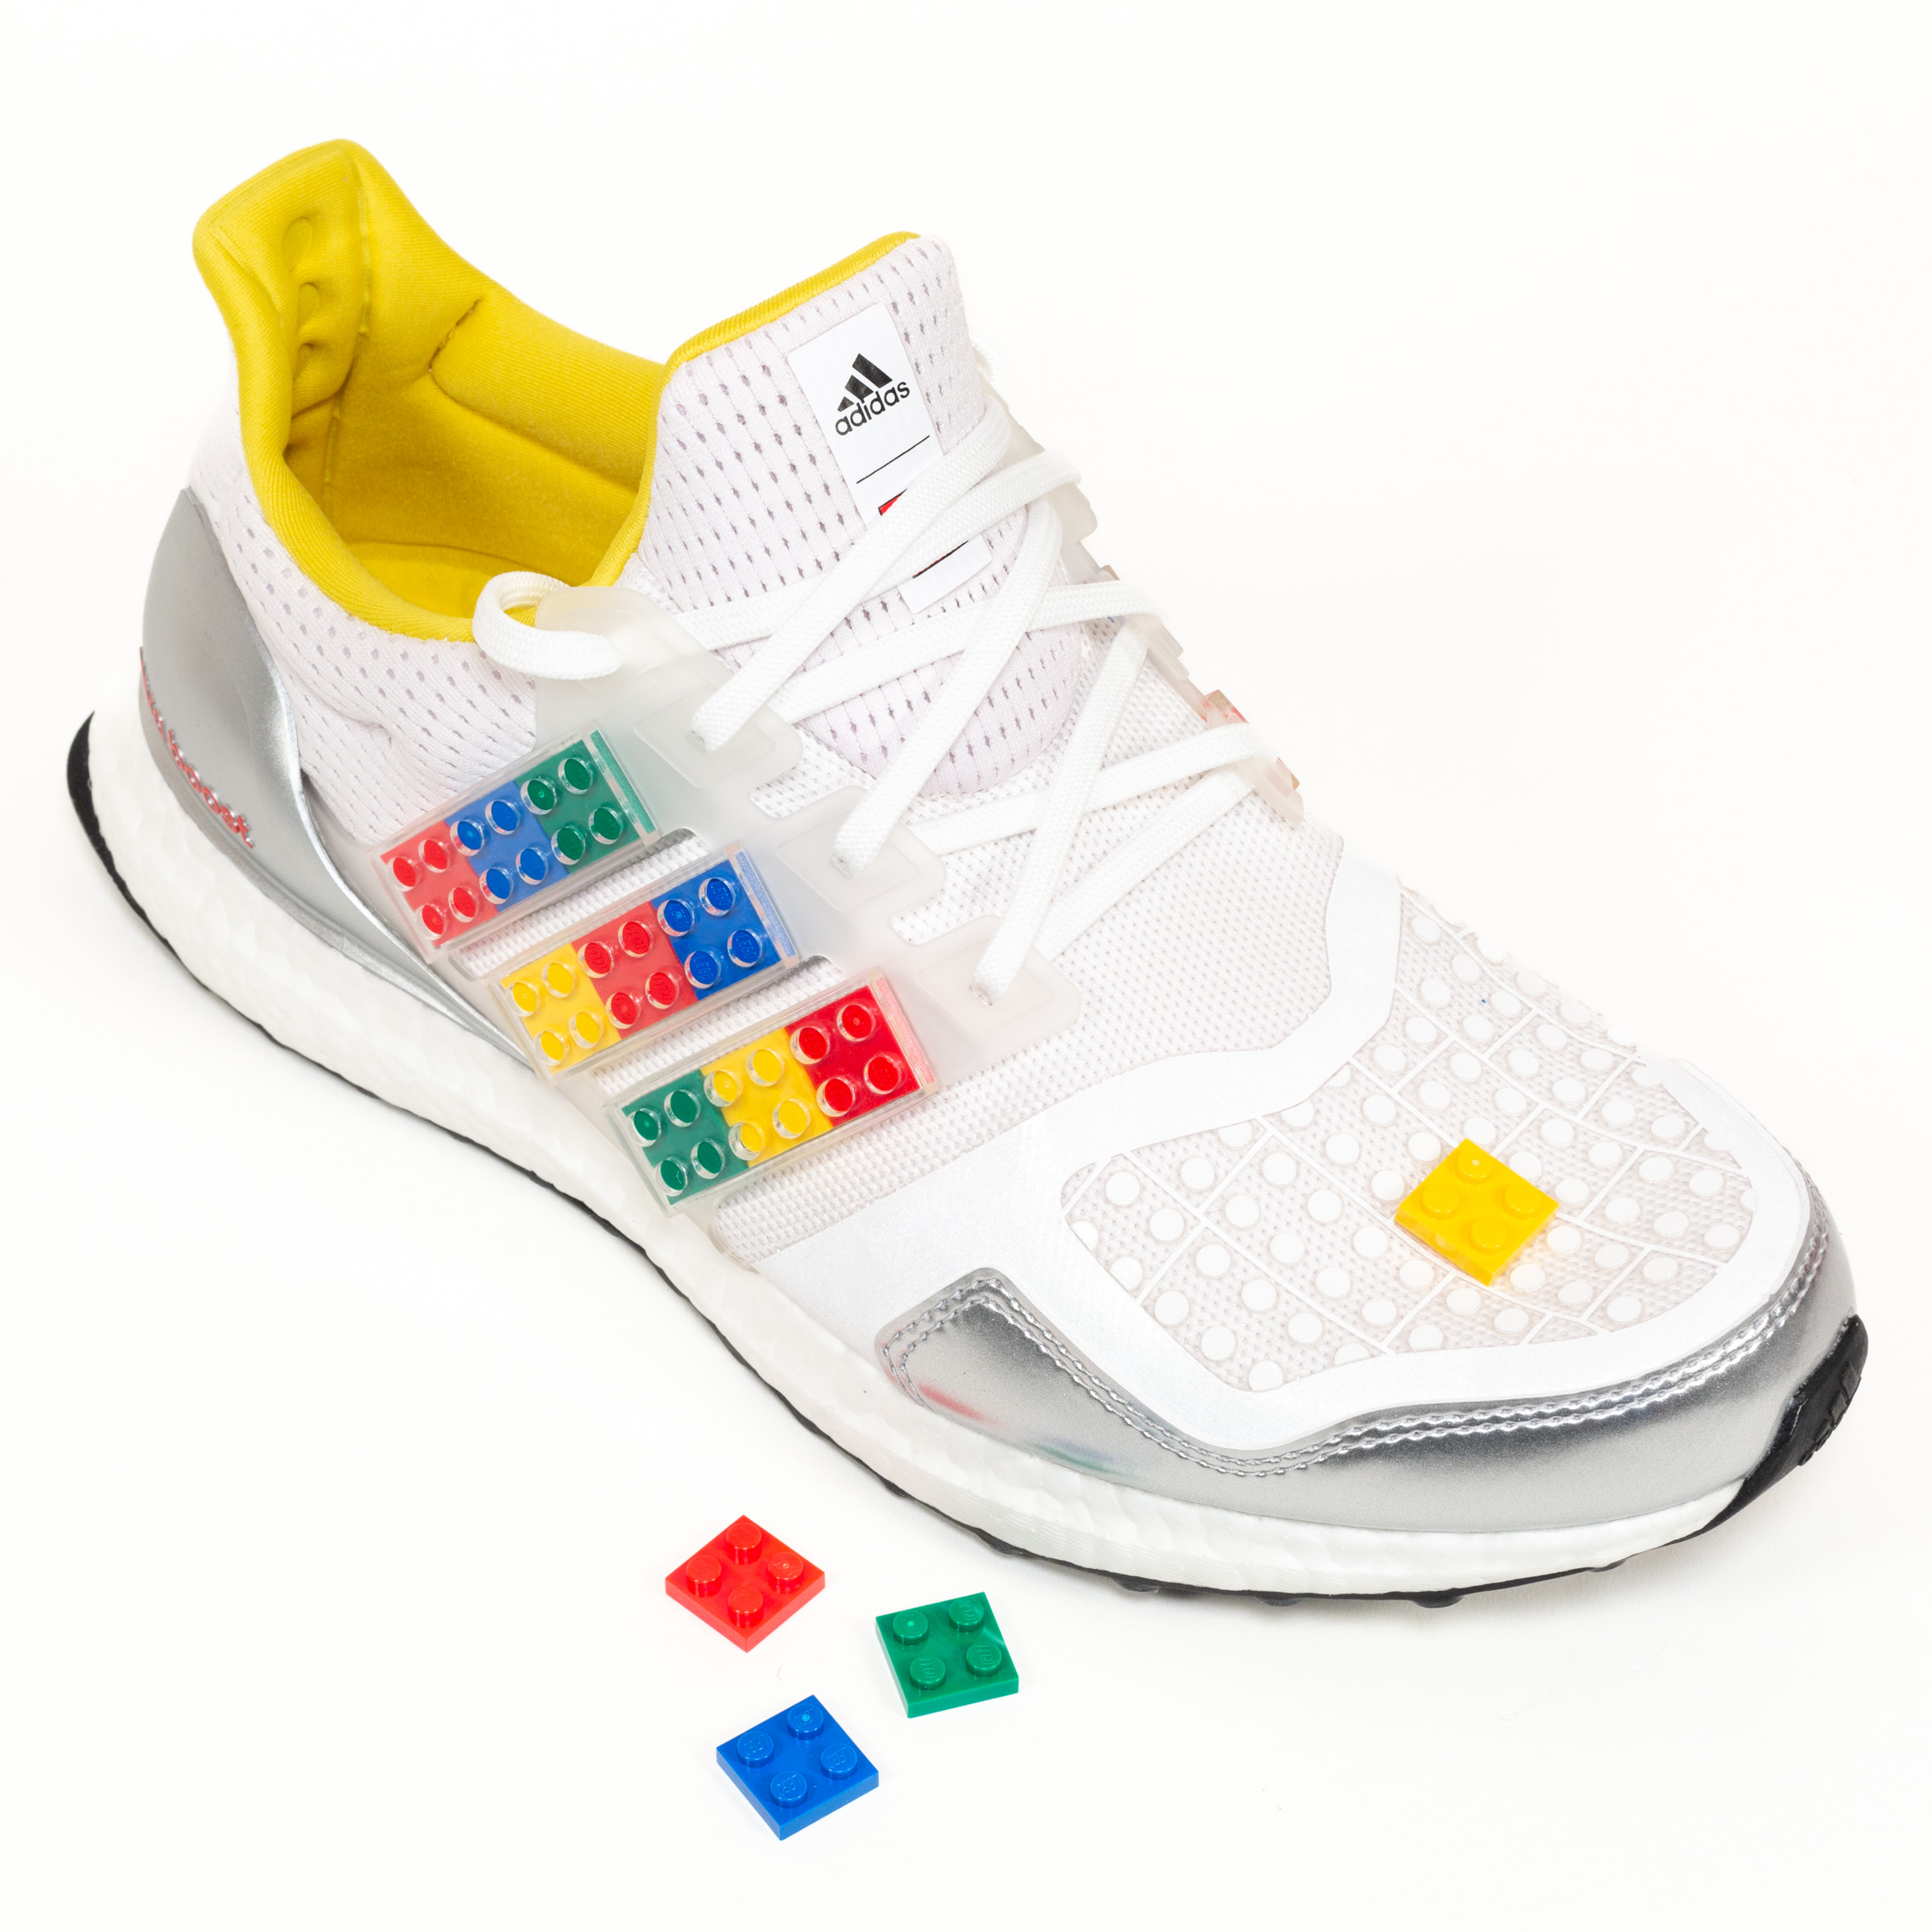 Review: Adidas Ultraboost DNA × LEGO Plates Shoes - BRICK ARCHITECT